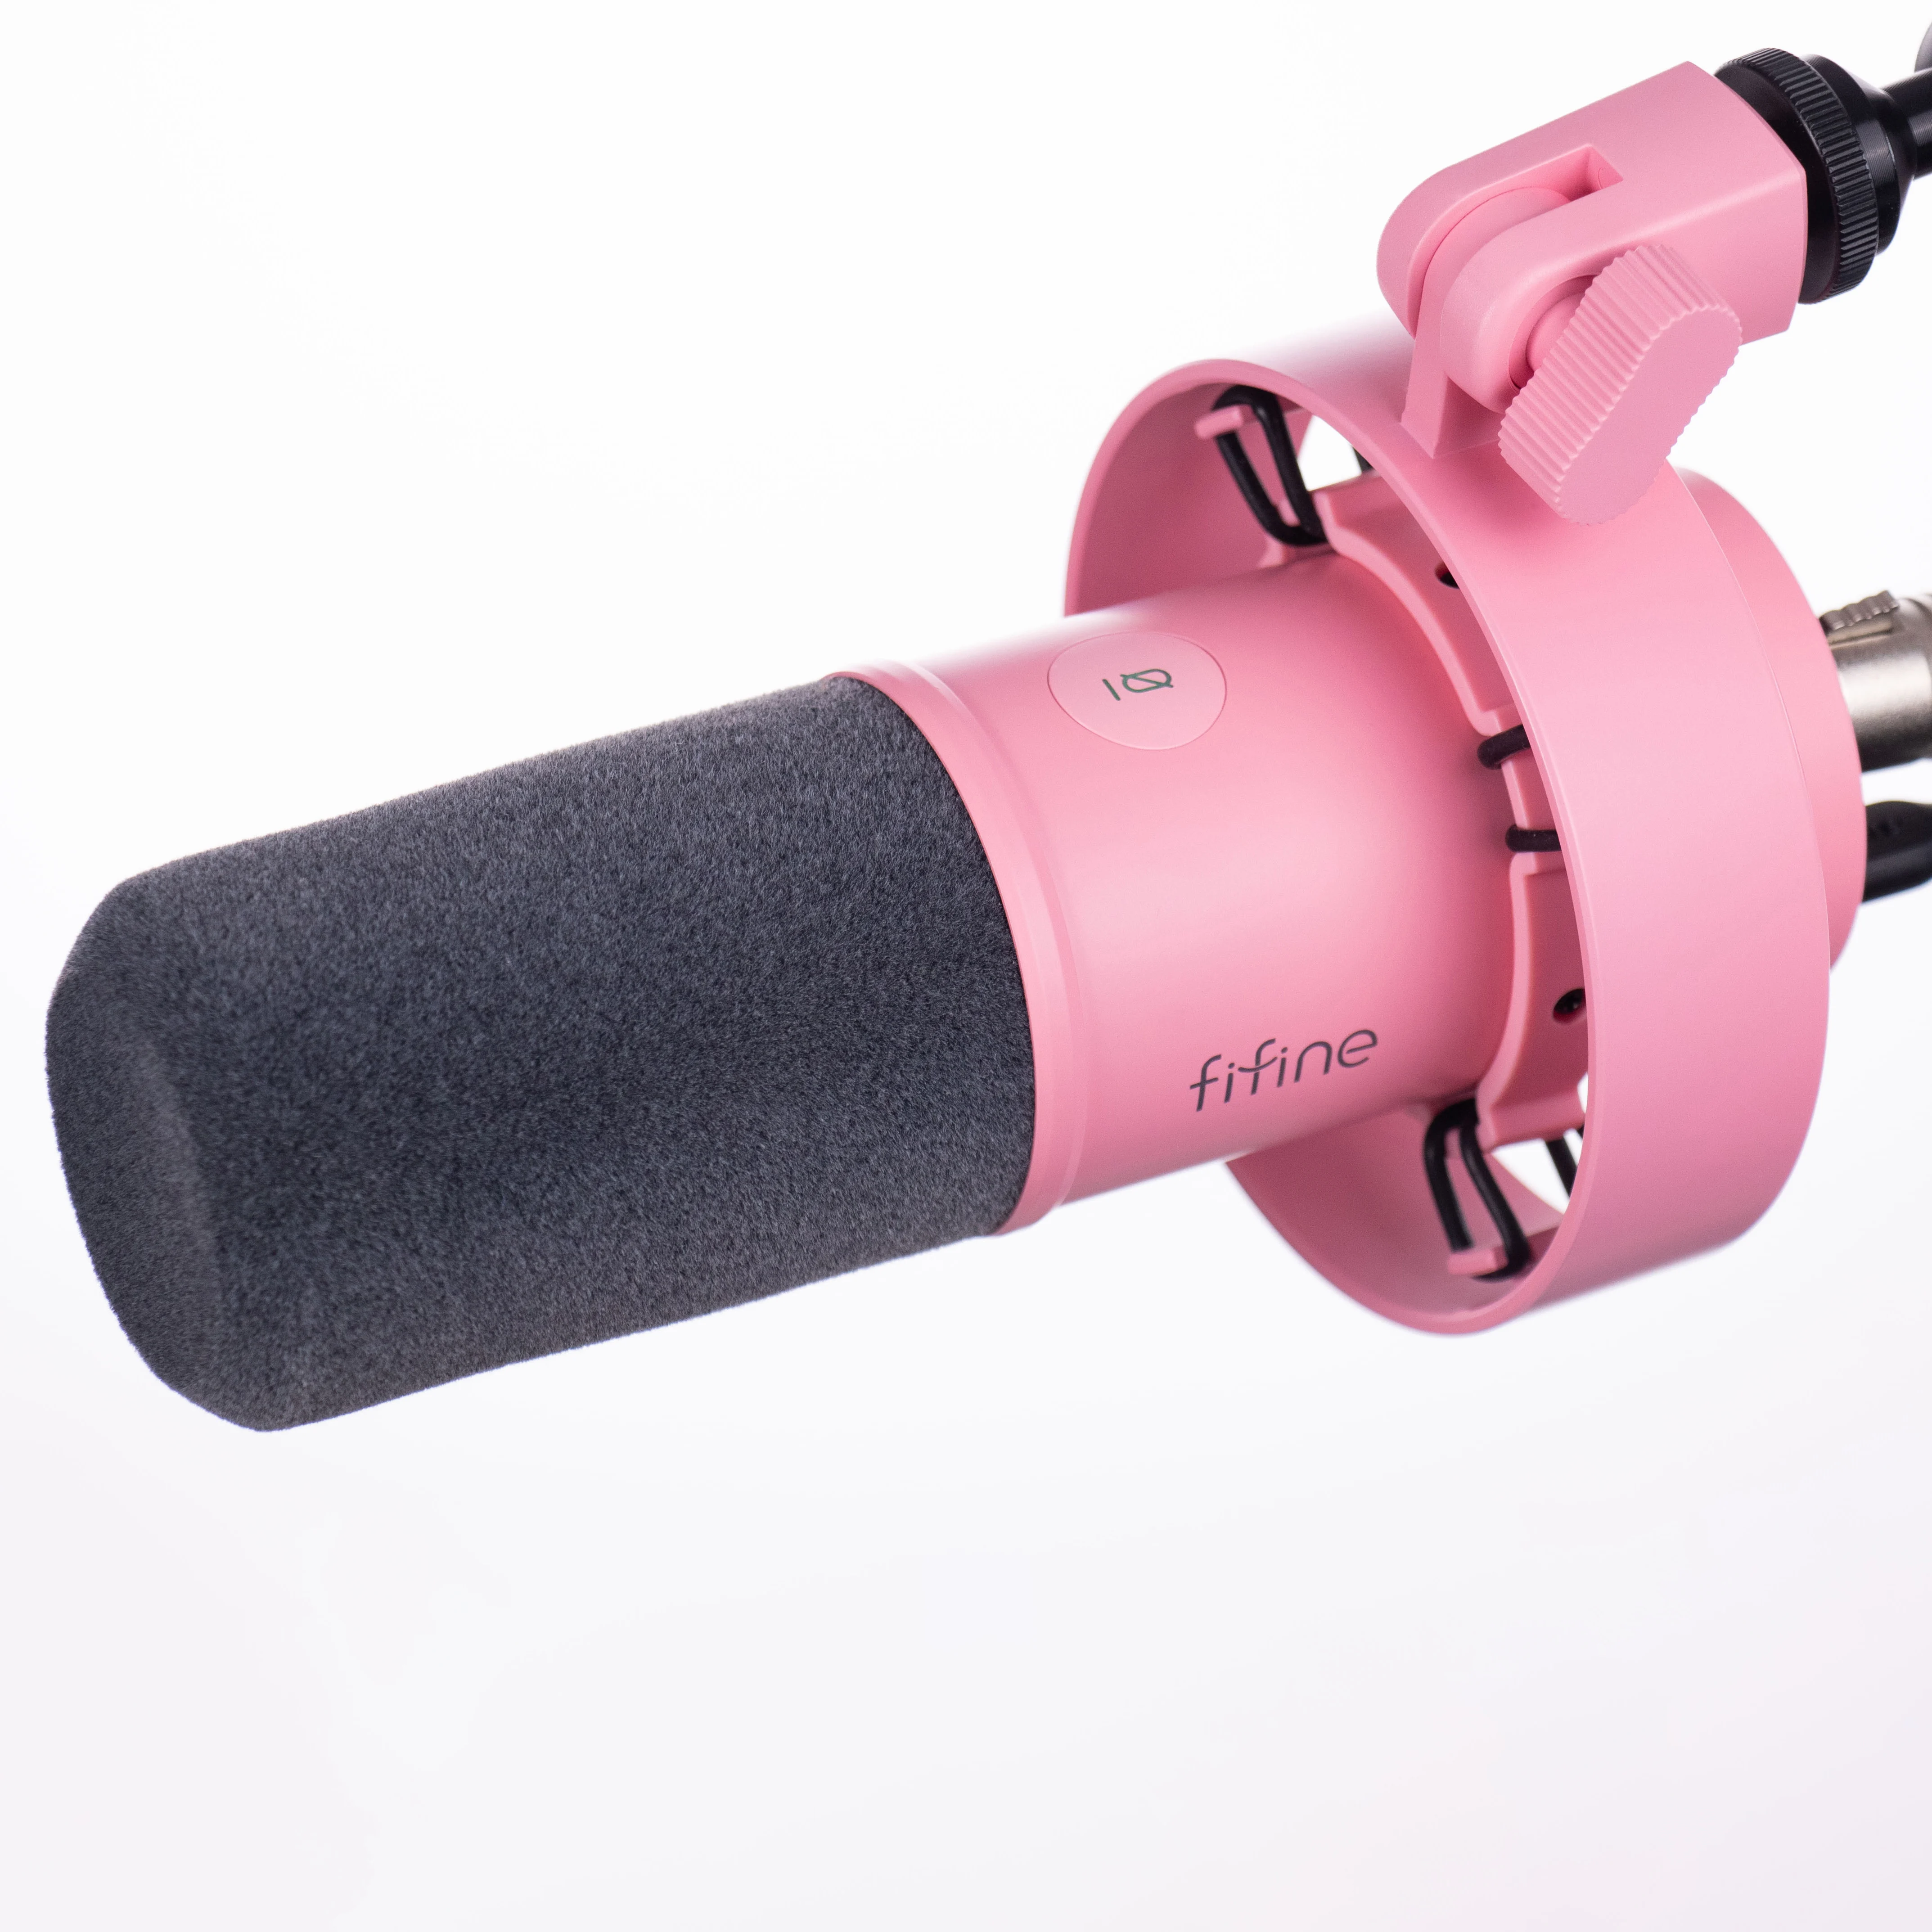 FIFINE K688 - buy microphone: prices, reviews, specifications > price in  stores Ukraine: Kyiv, Dnepropetrovsk, Lviv, Odessa